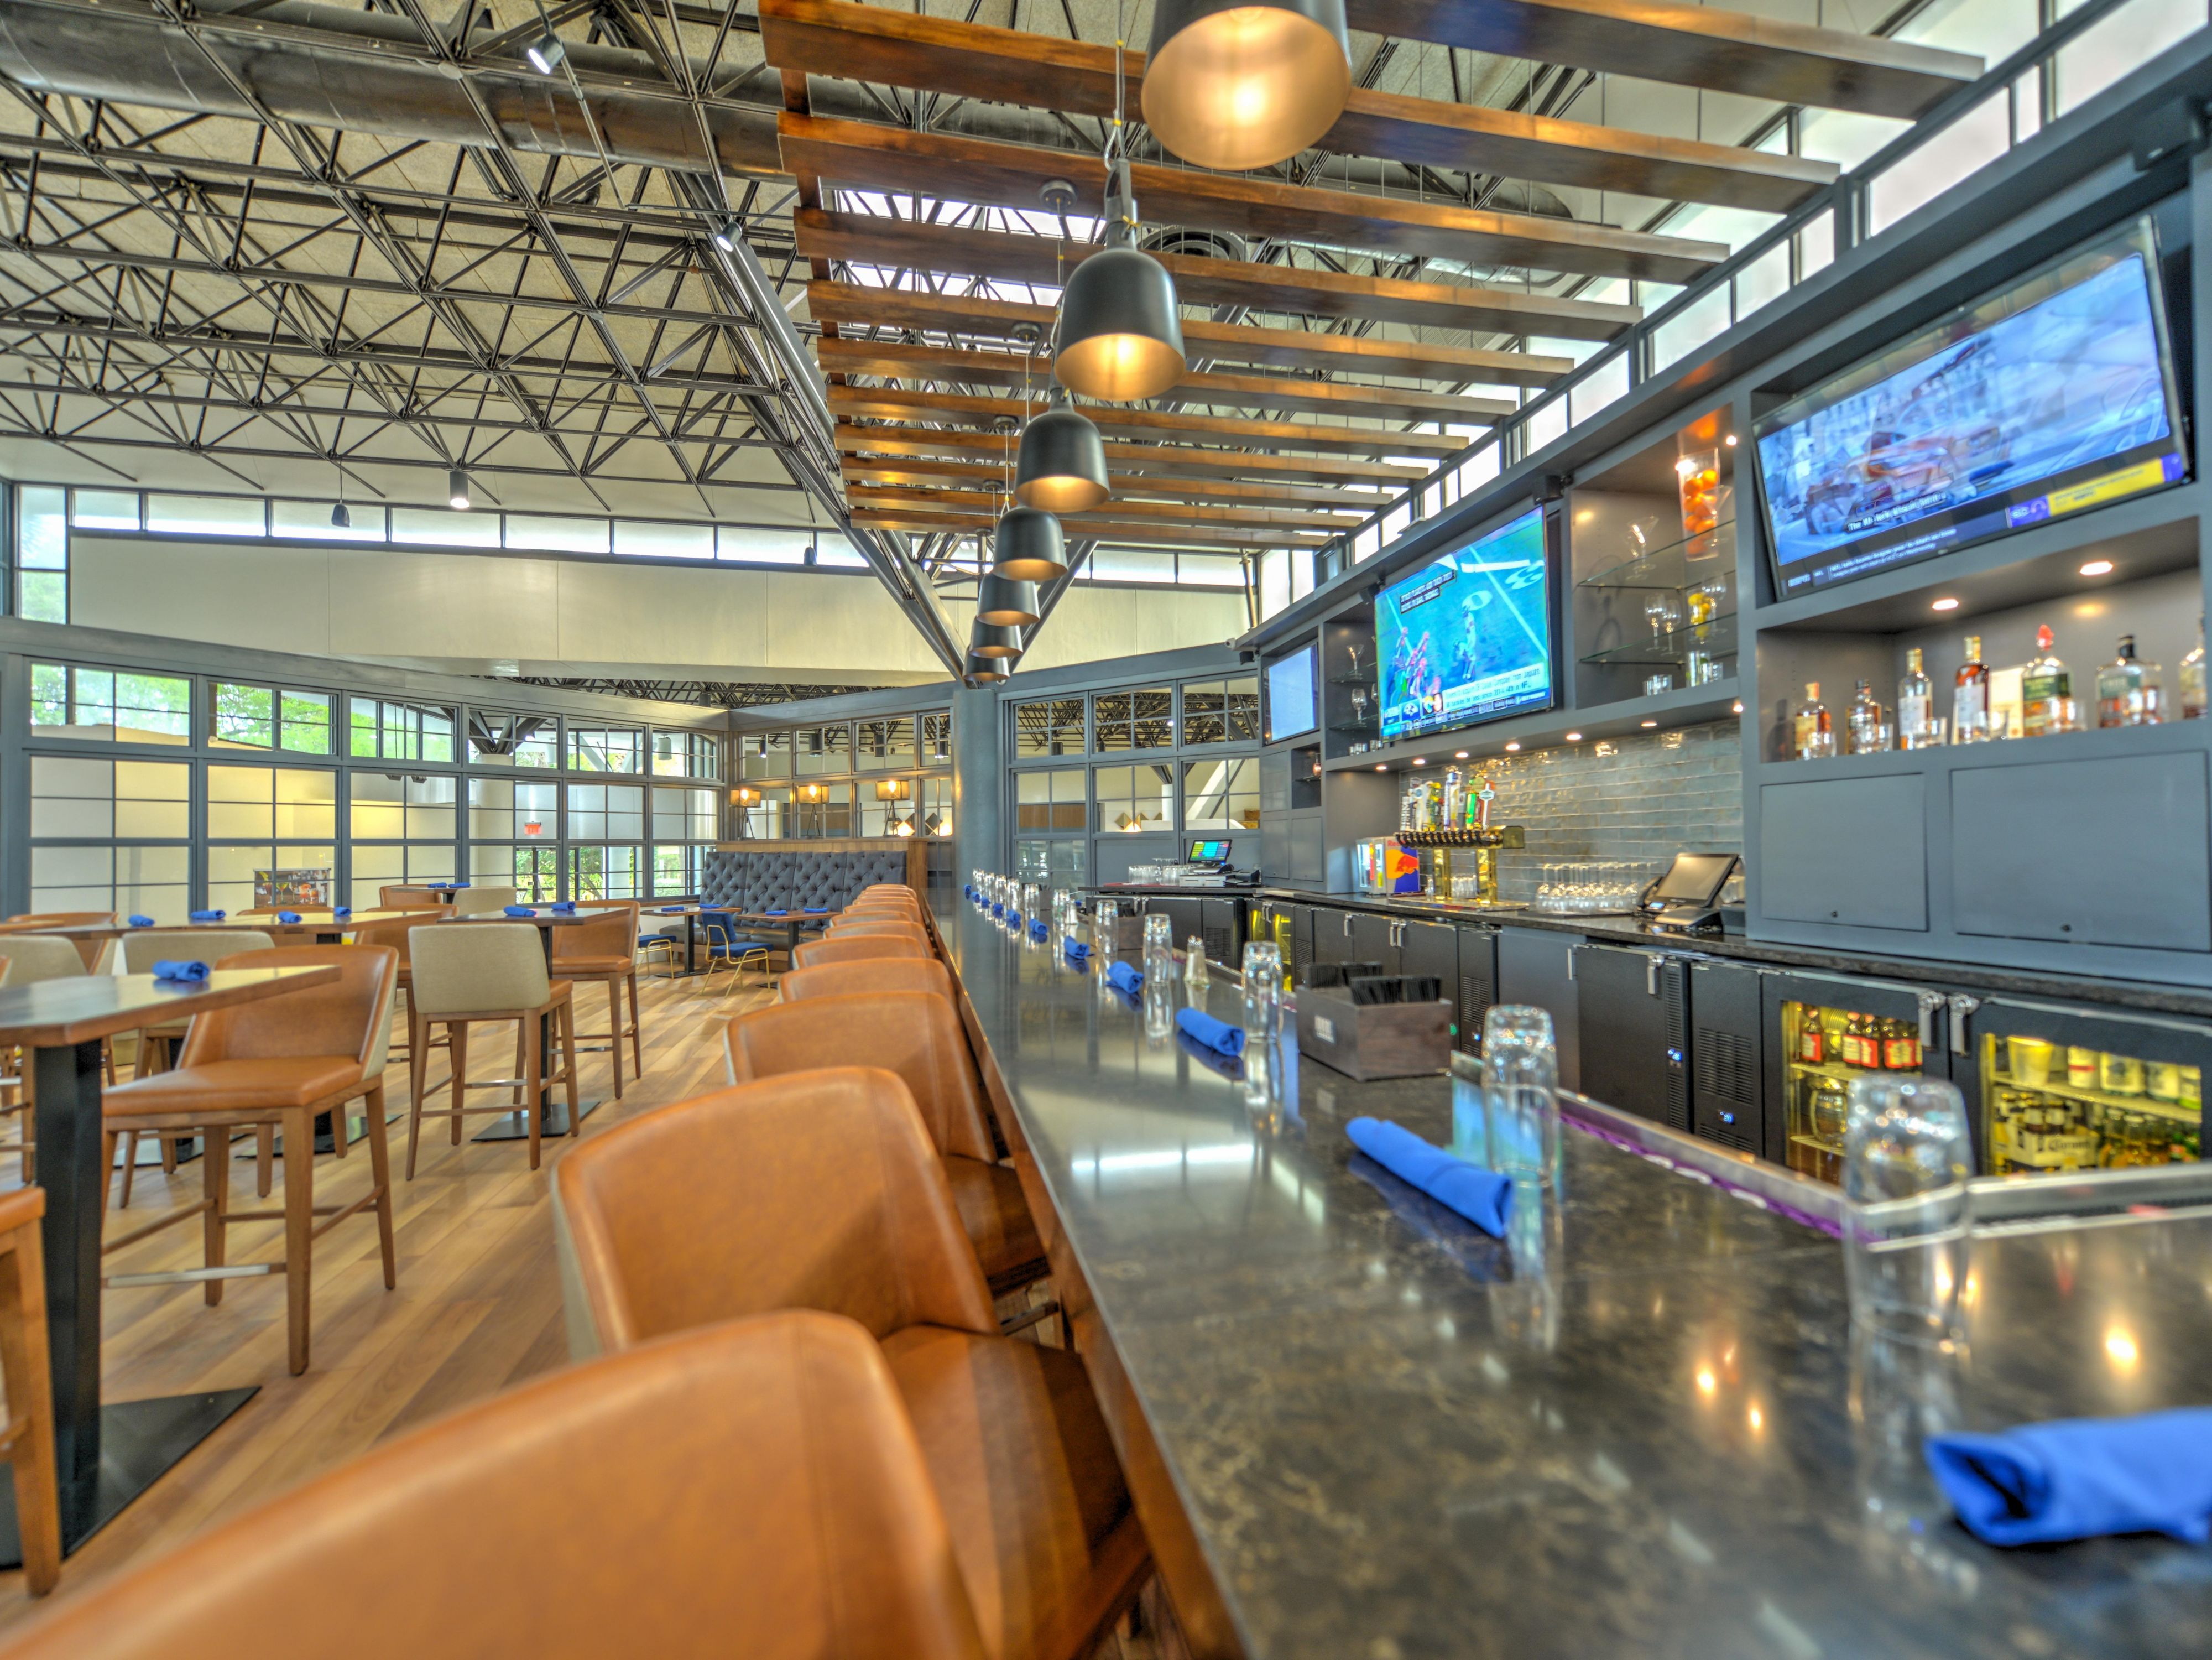 Enjoy favorite drinks and casual dishes at our hotel restaurant and bar near Jacksonville International Airport, Proper 1822. Located in our lobby, our eatery offers American fare for breakfast, lunch, and dinner. Savor specialty cocktails and rotating drinks on 12 taps at our remodeled bar.